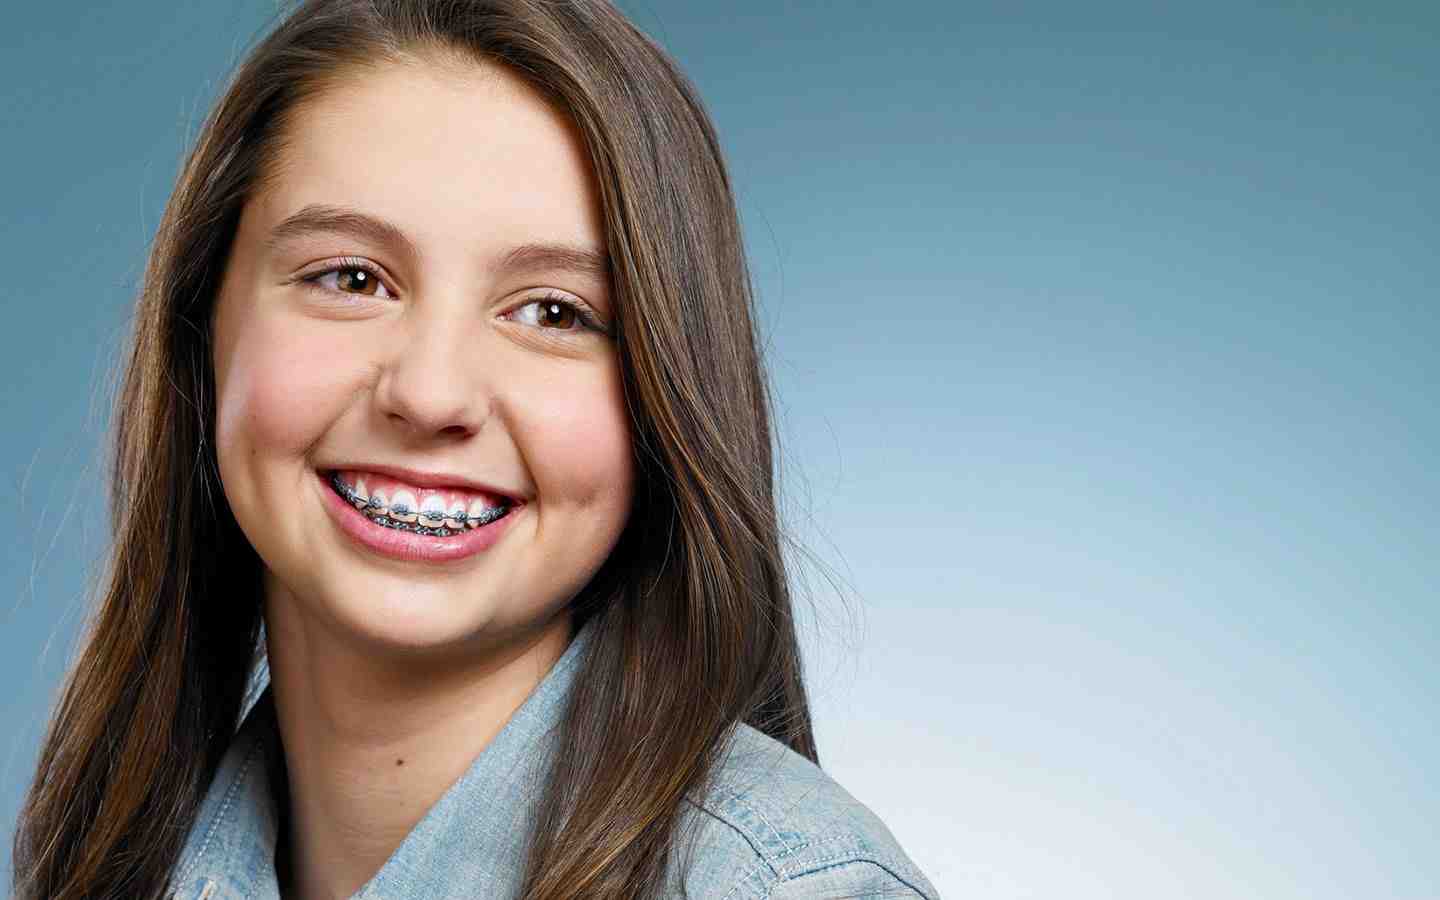 Should I go to dentist or orthodontist for braces?